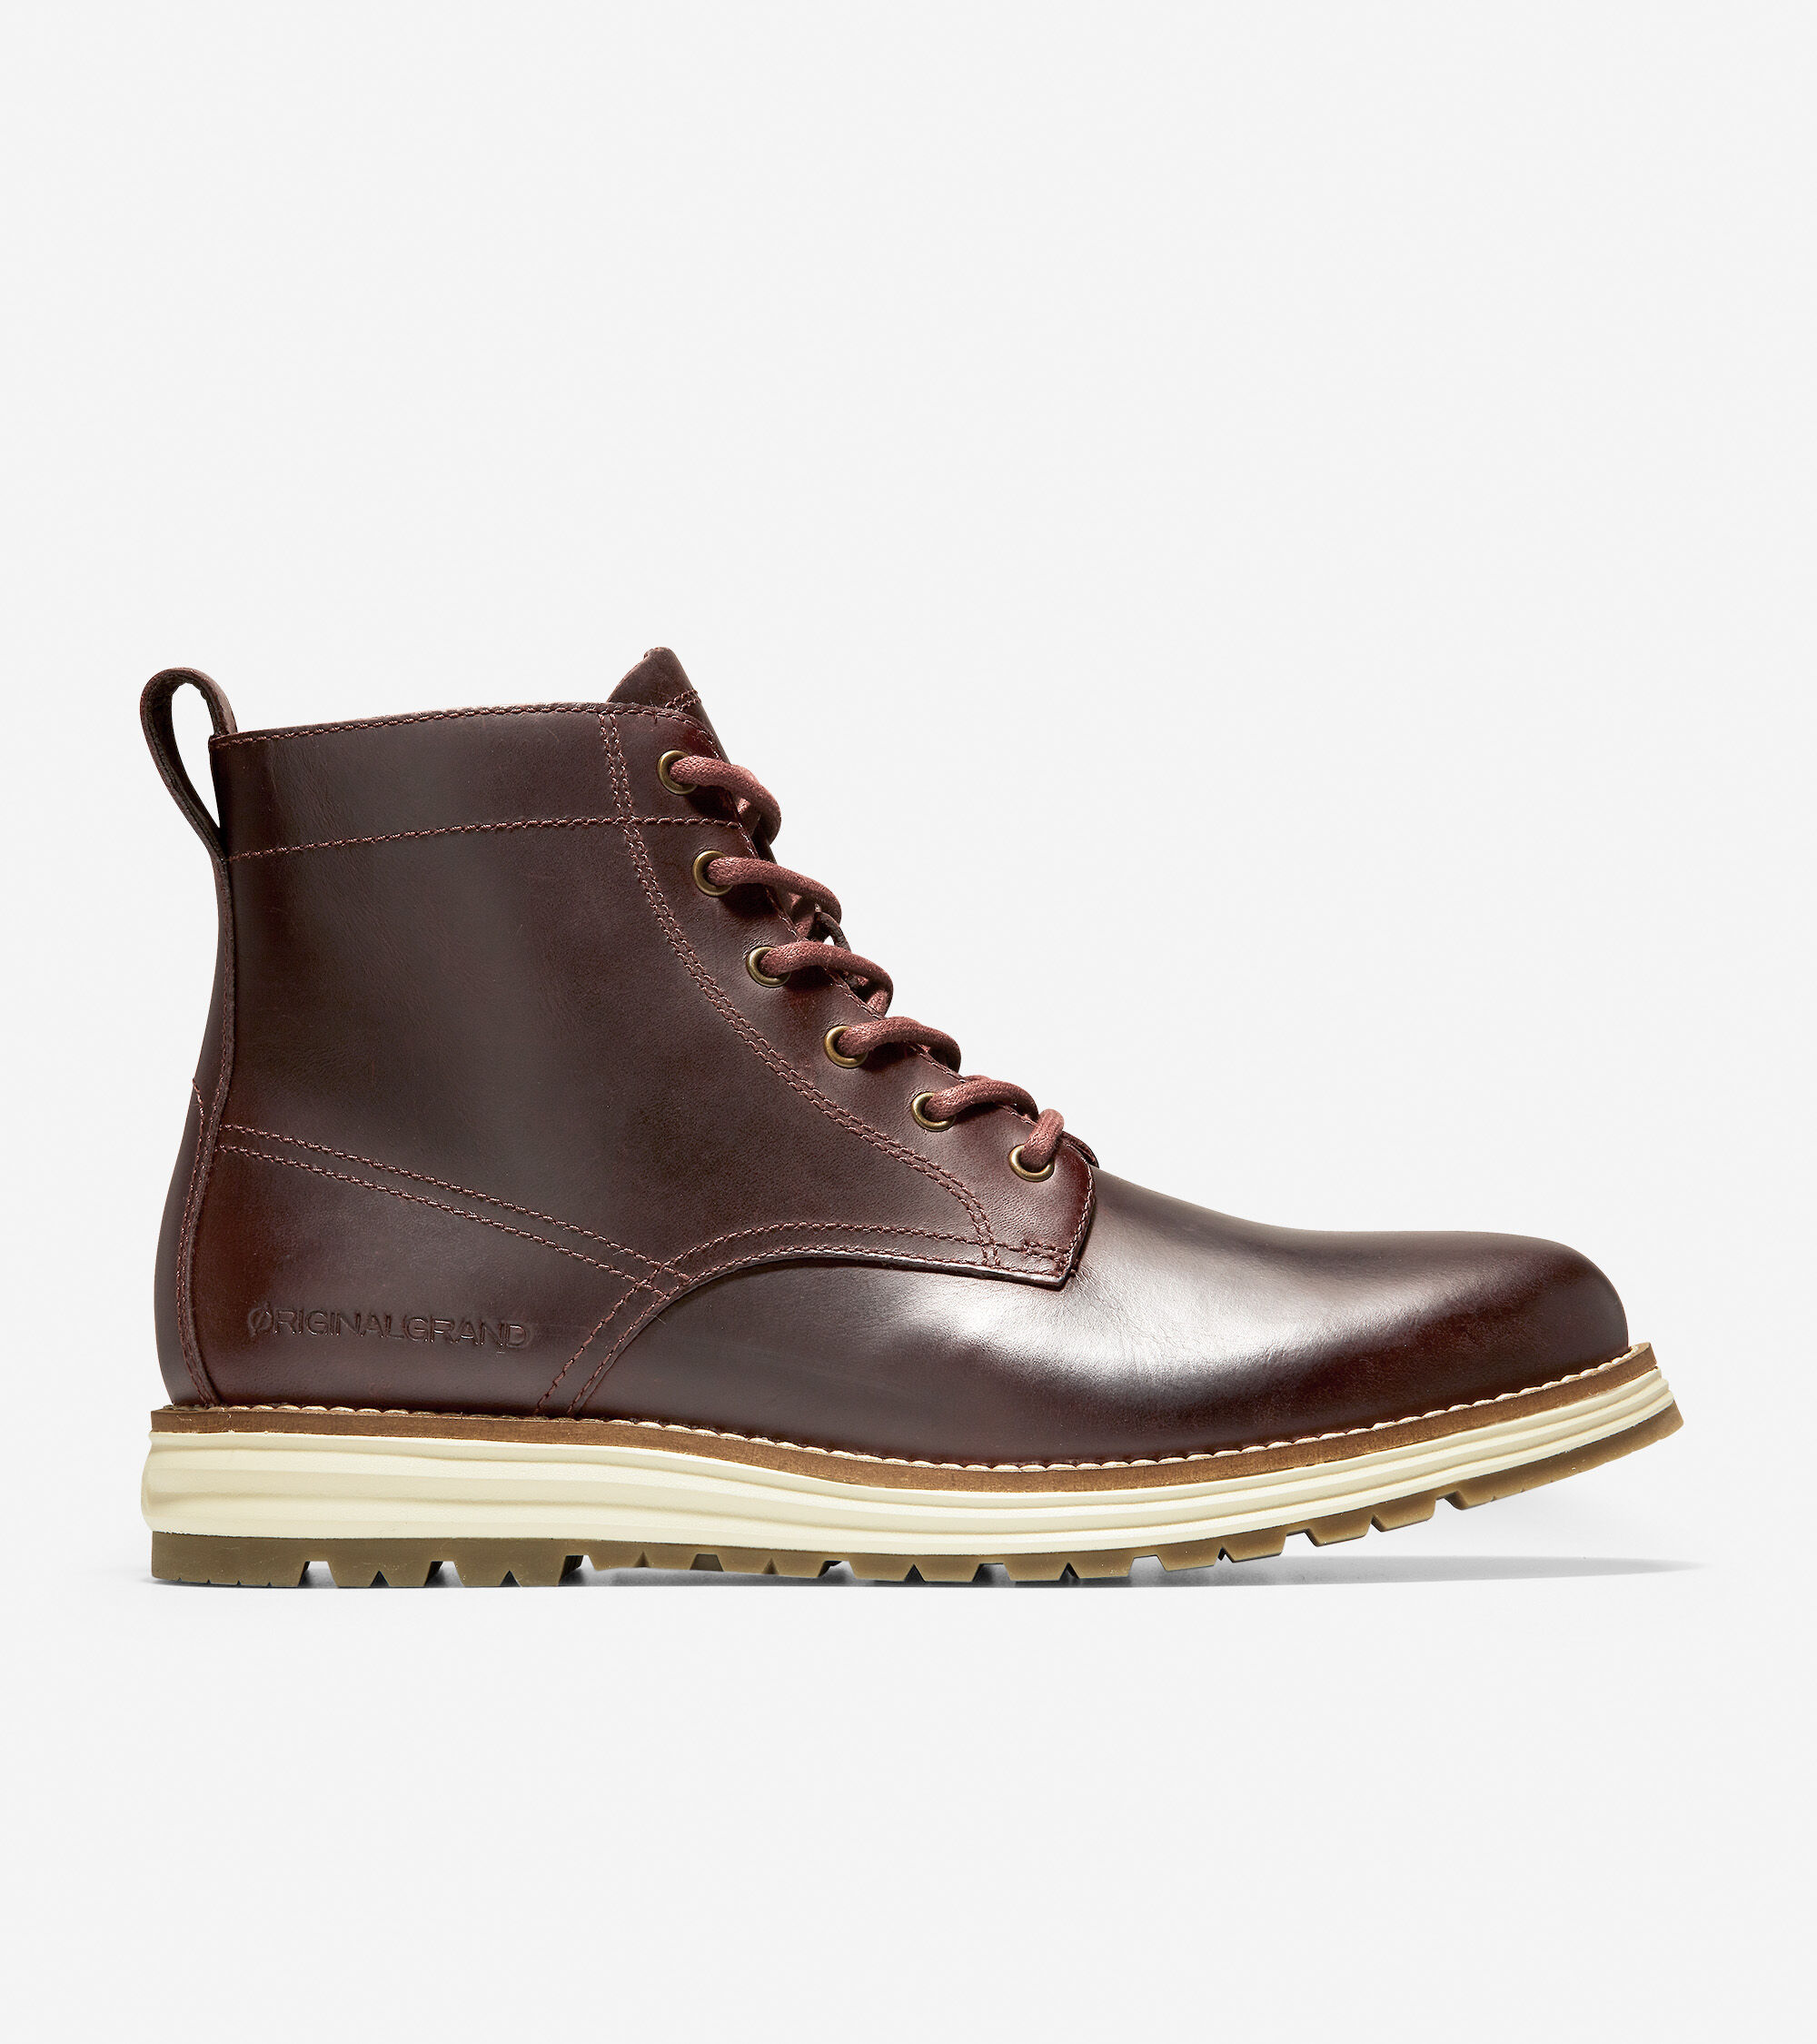 discounted cole haan shoes